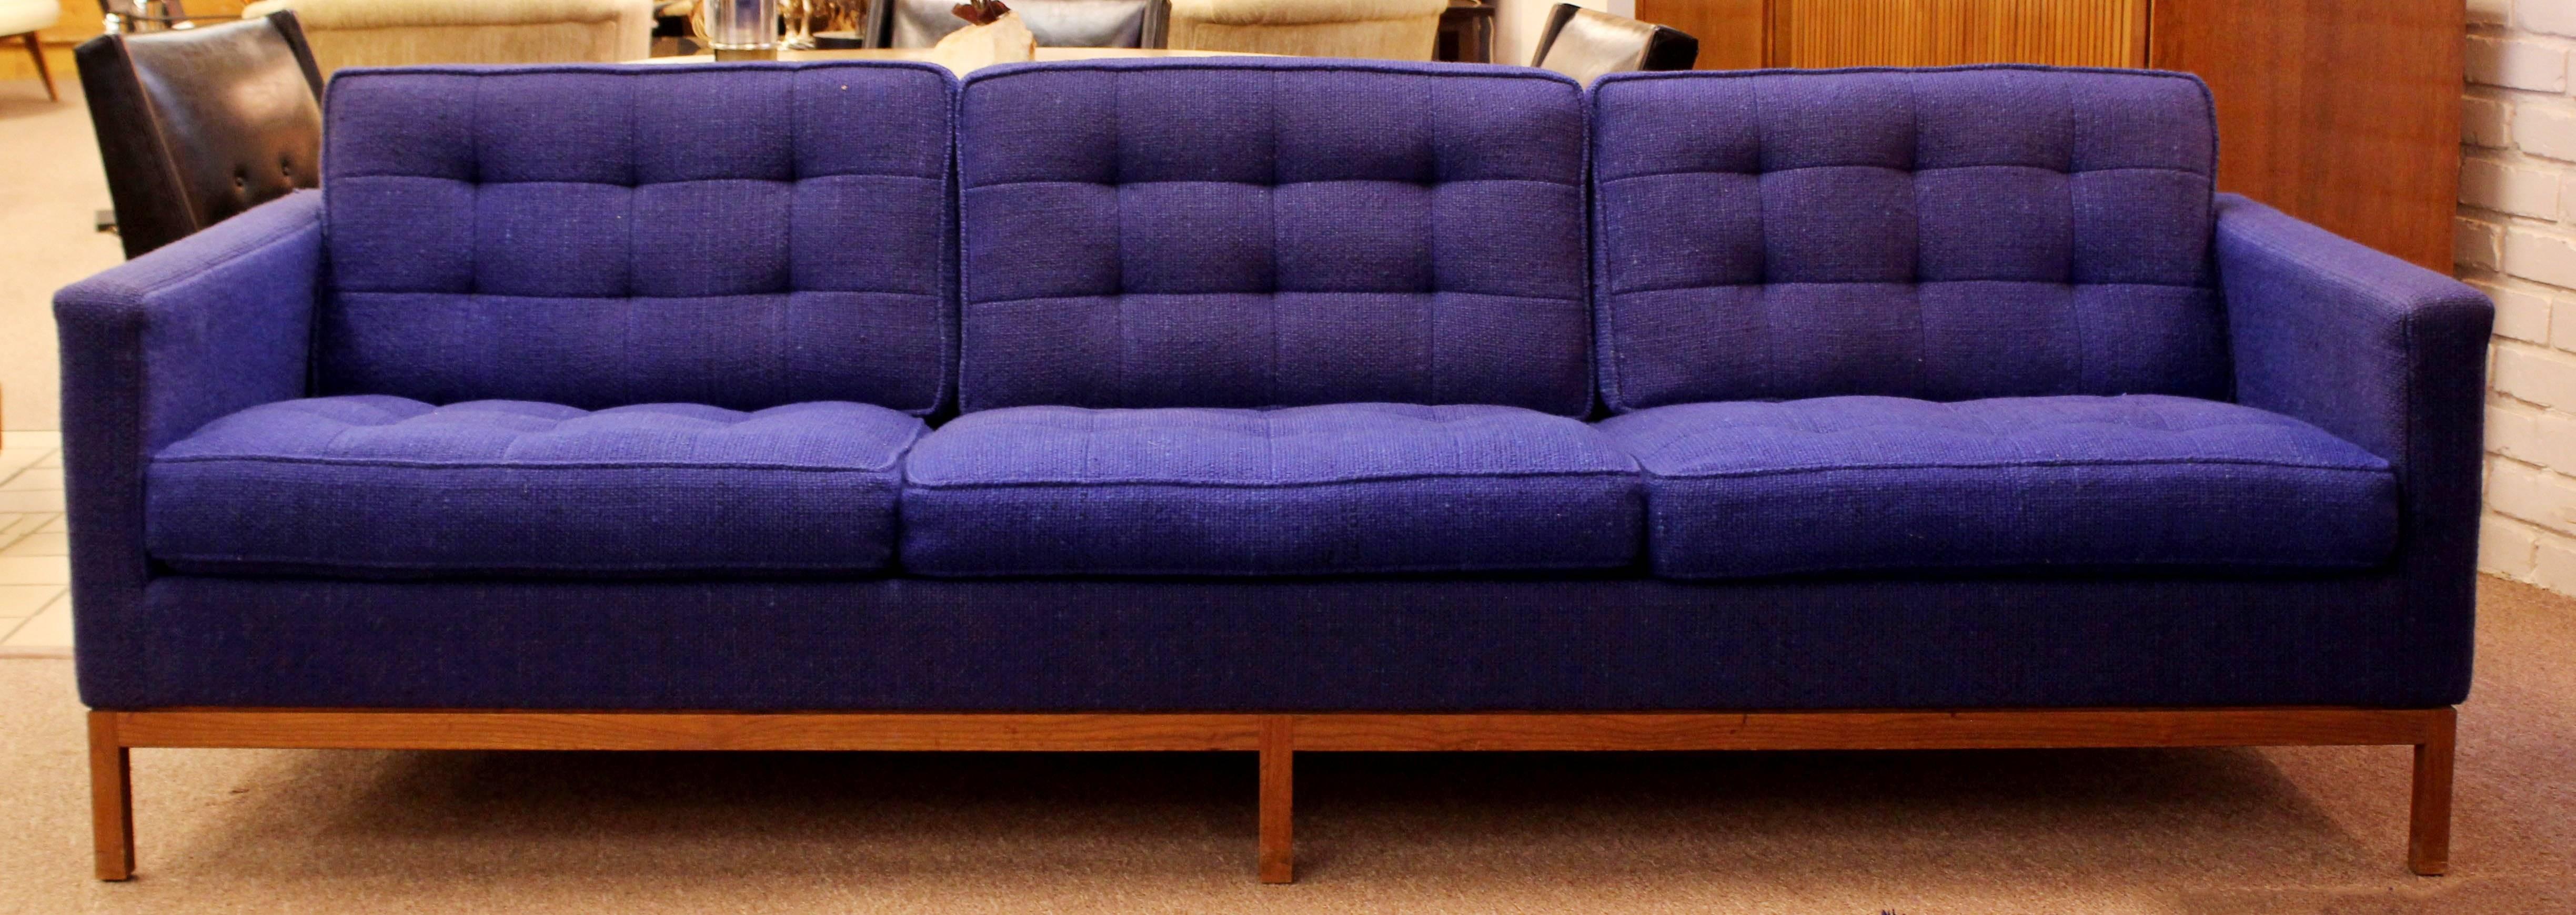 Mid-Century Modern Florence Knoll Three-Seat Lounge Sofa Model 1205 Wood Frame In Good Condition In Keego Harbor, MI